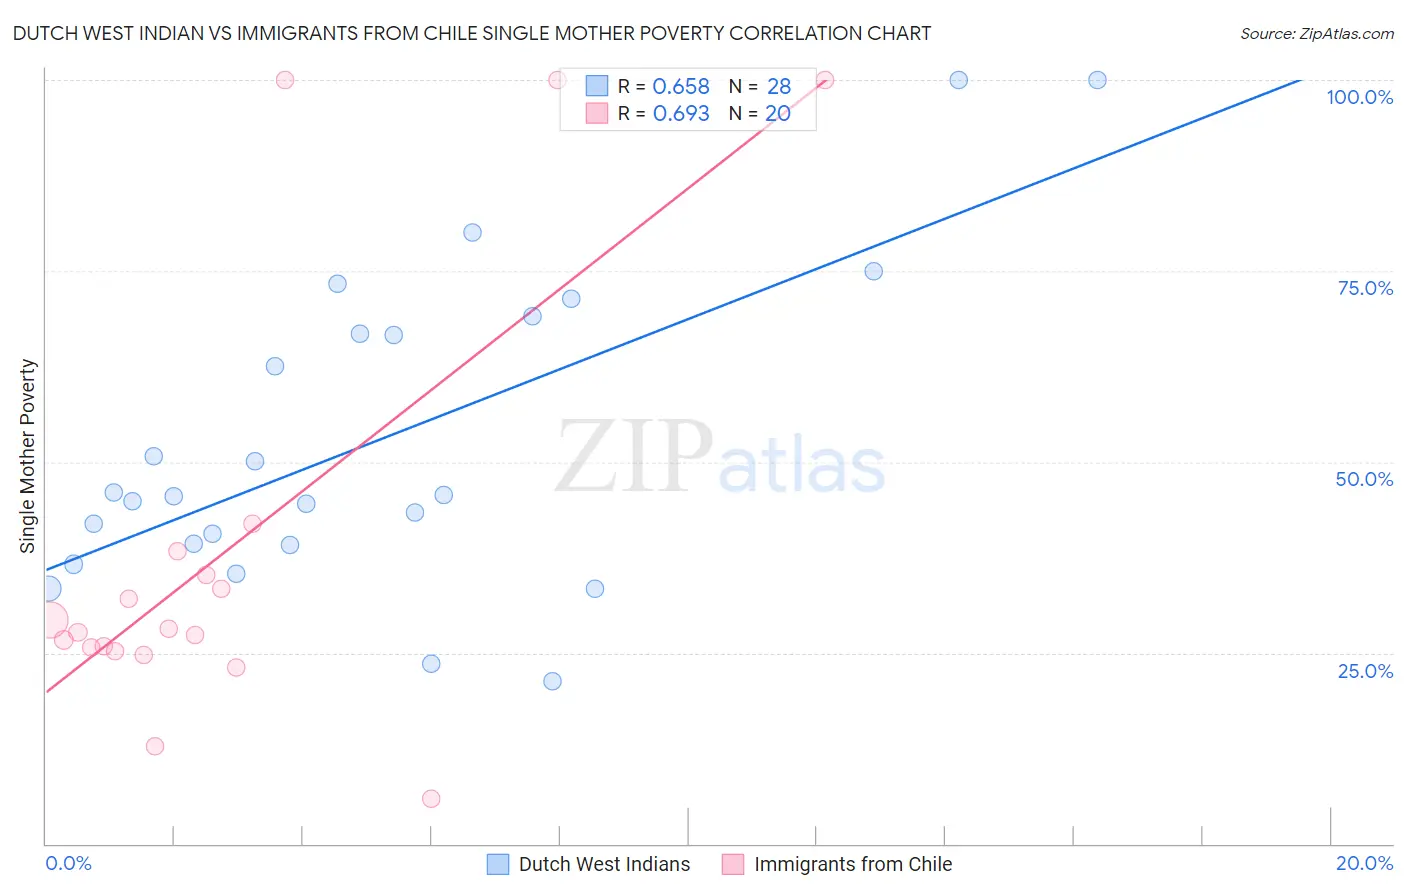 Dutch West Indian vs Immigrants from Chile Single Mother Poverty